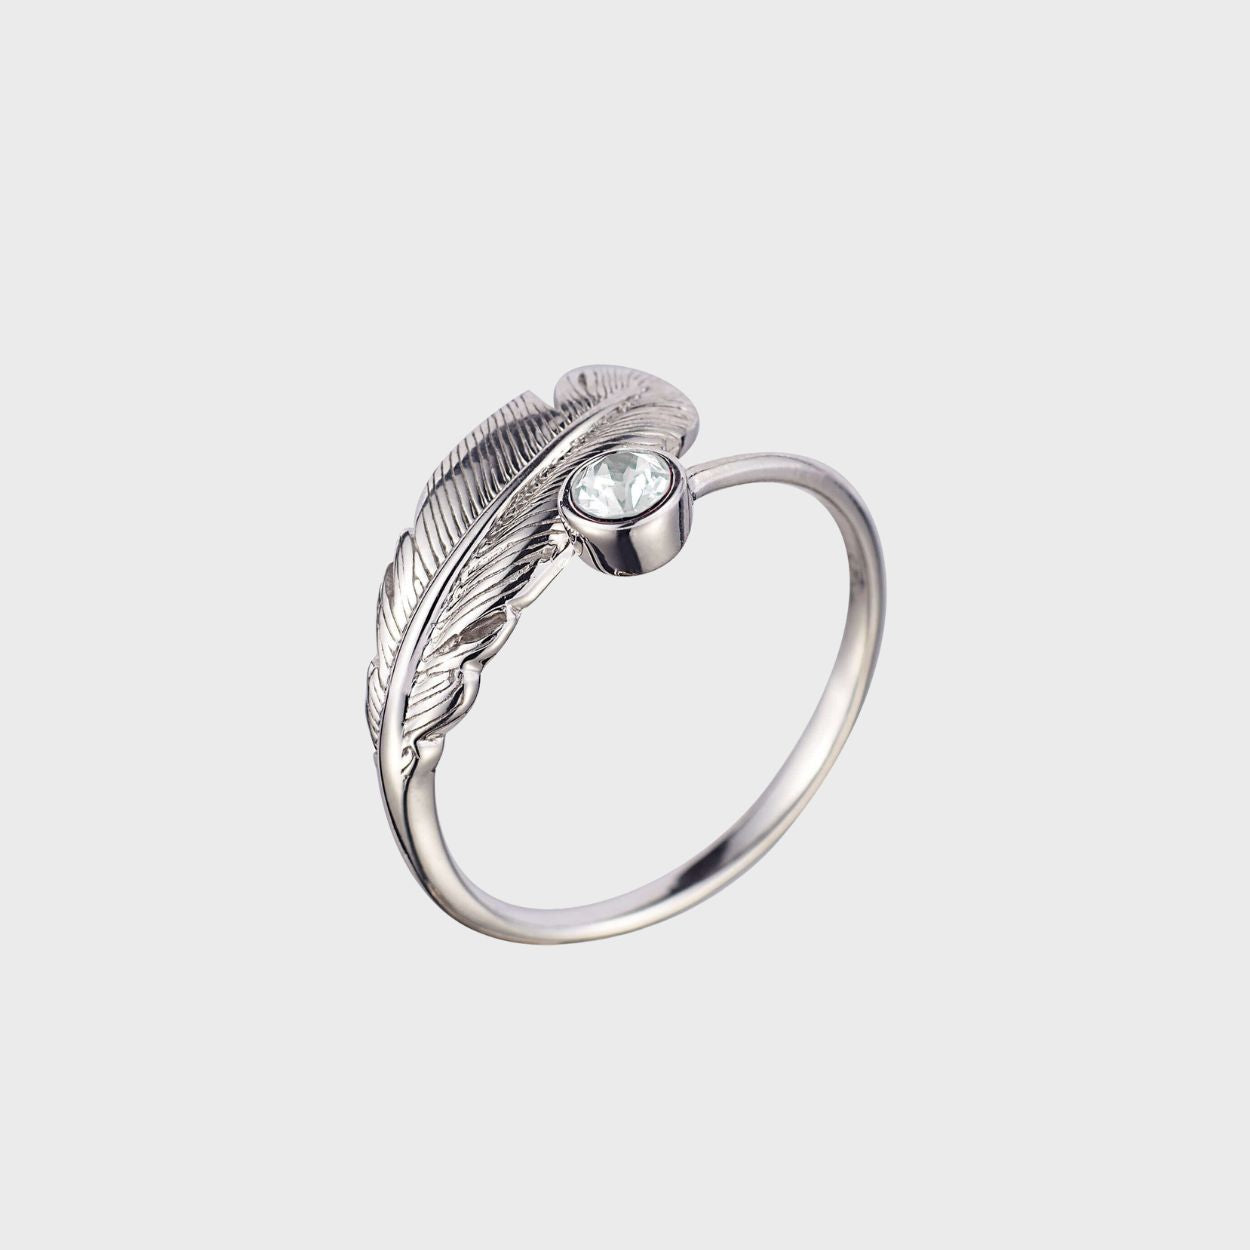 Adjustable Crystal Feather Birthstone Ring - April